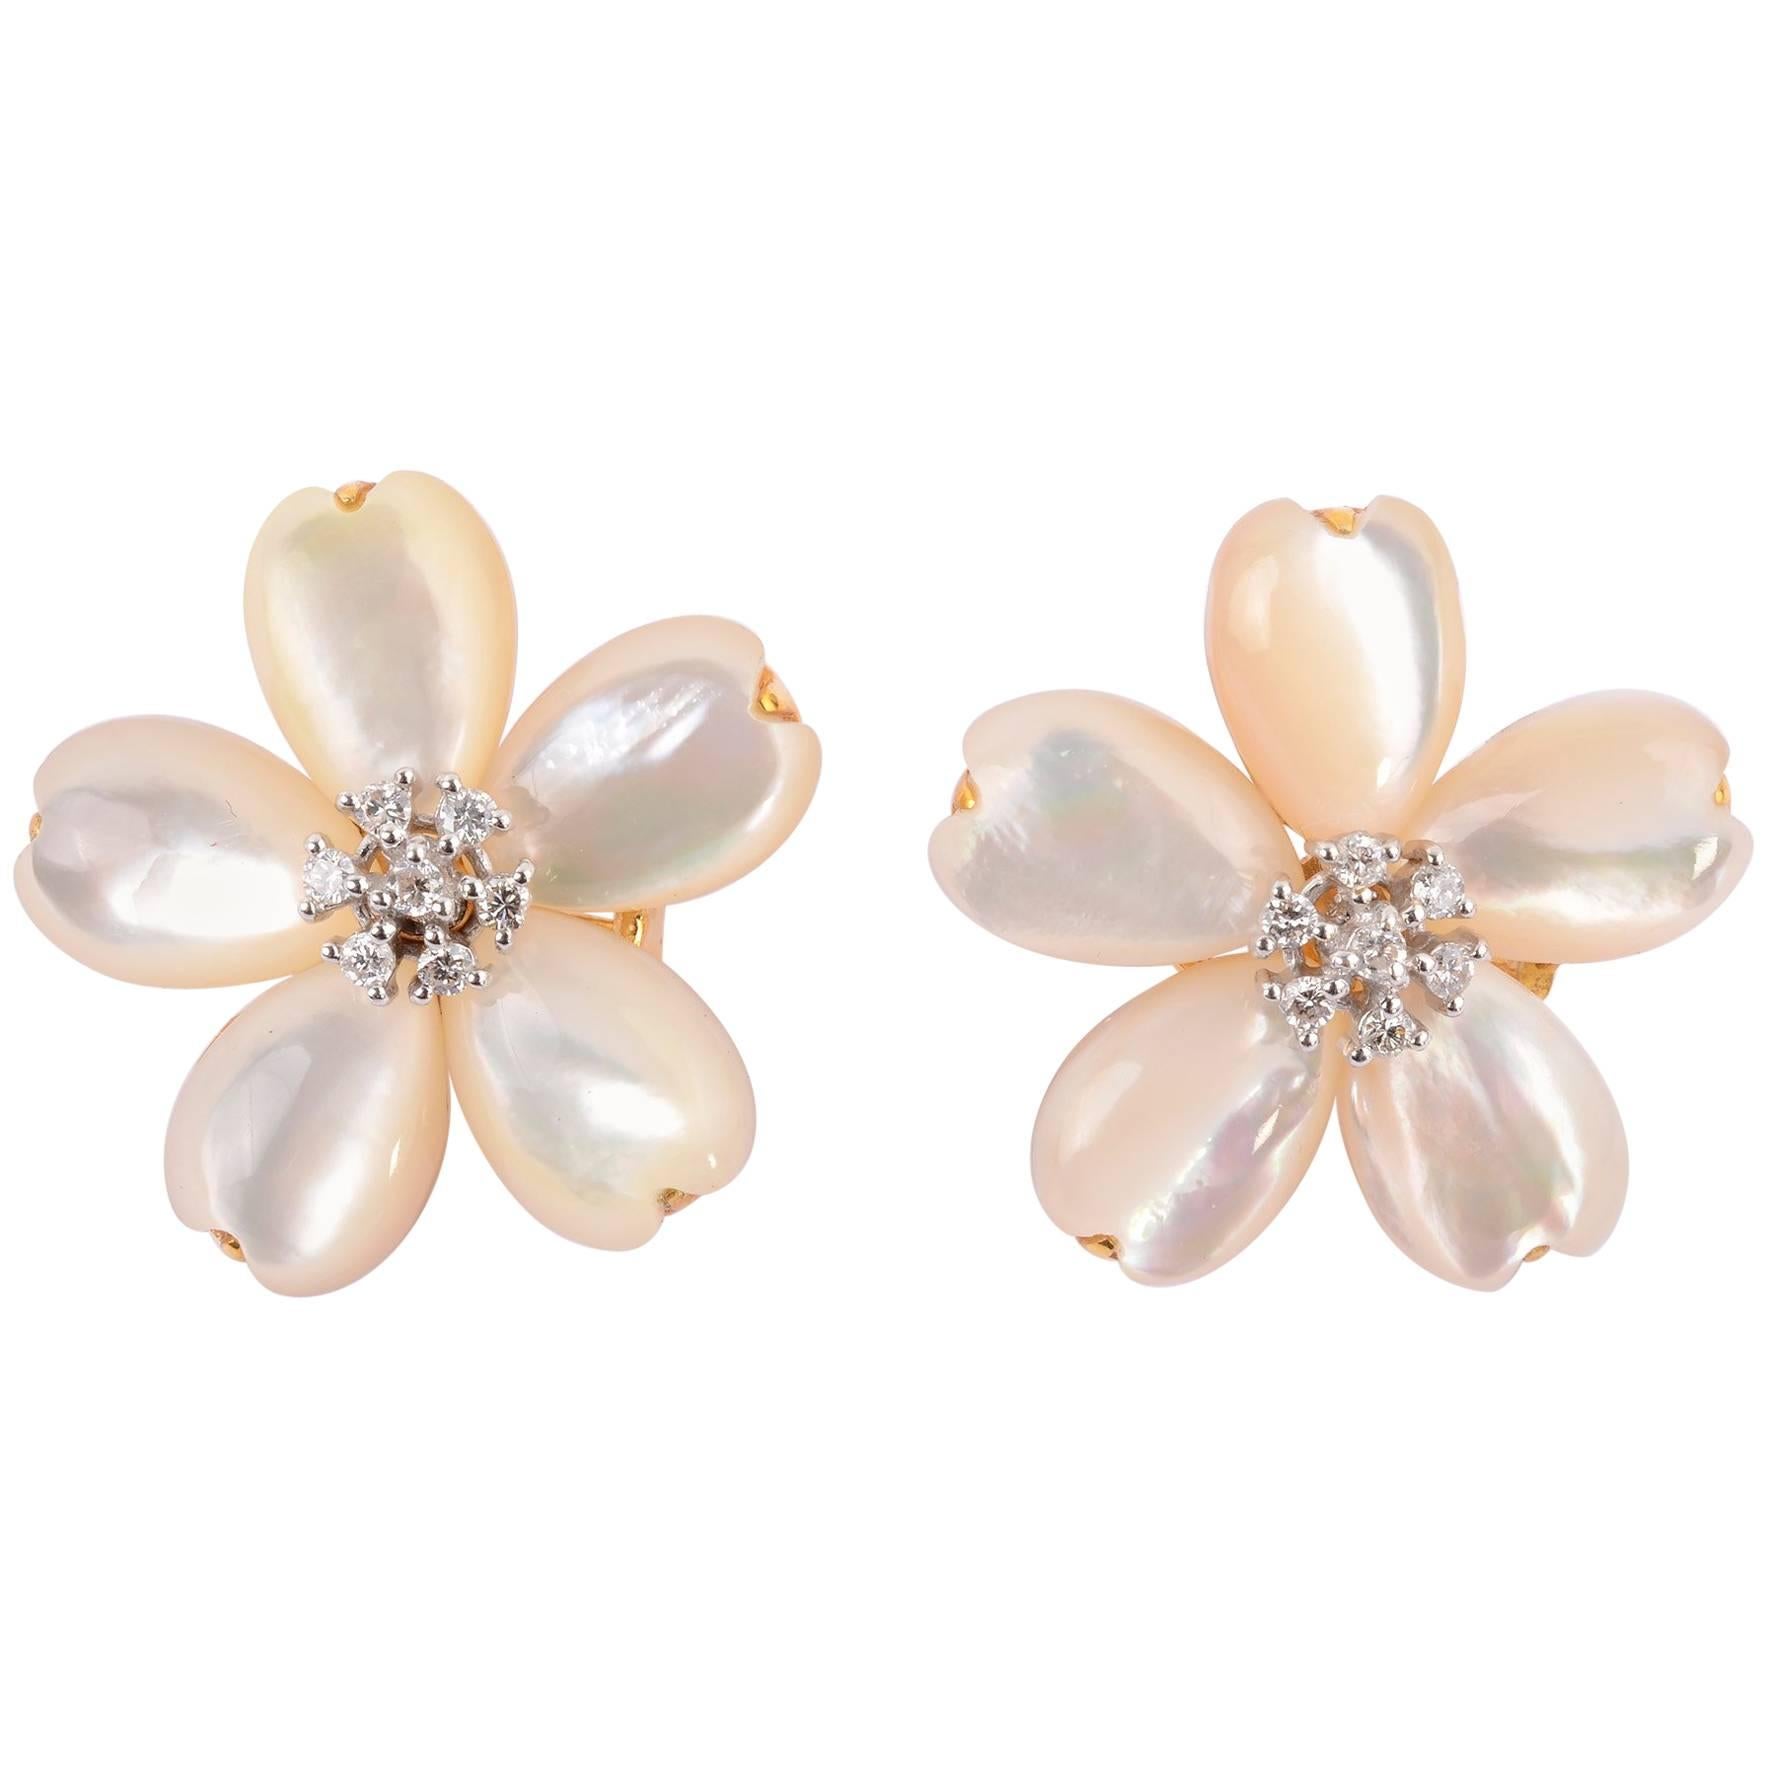 Flower Earrings with Mother-of-Pearl and Diamonds